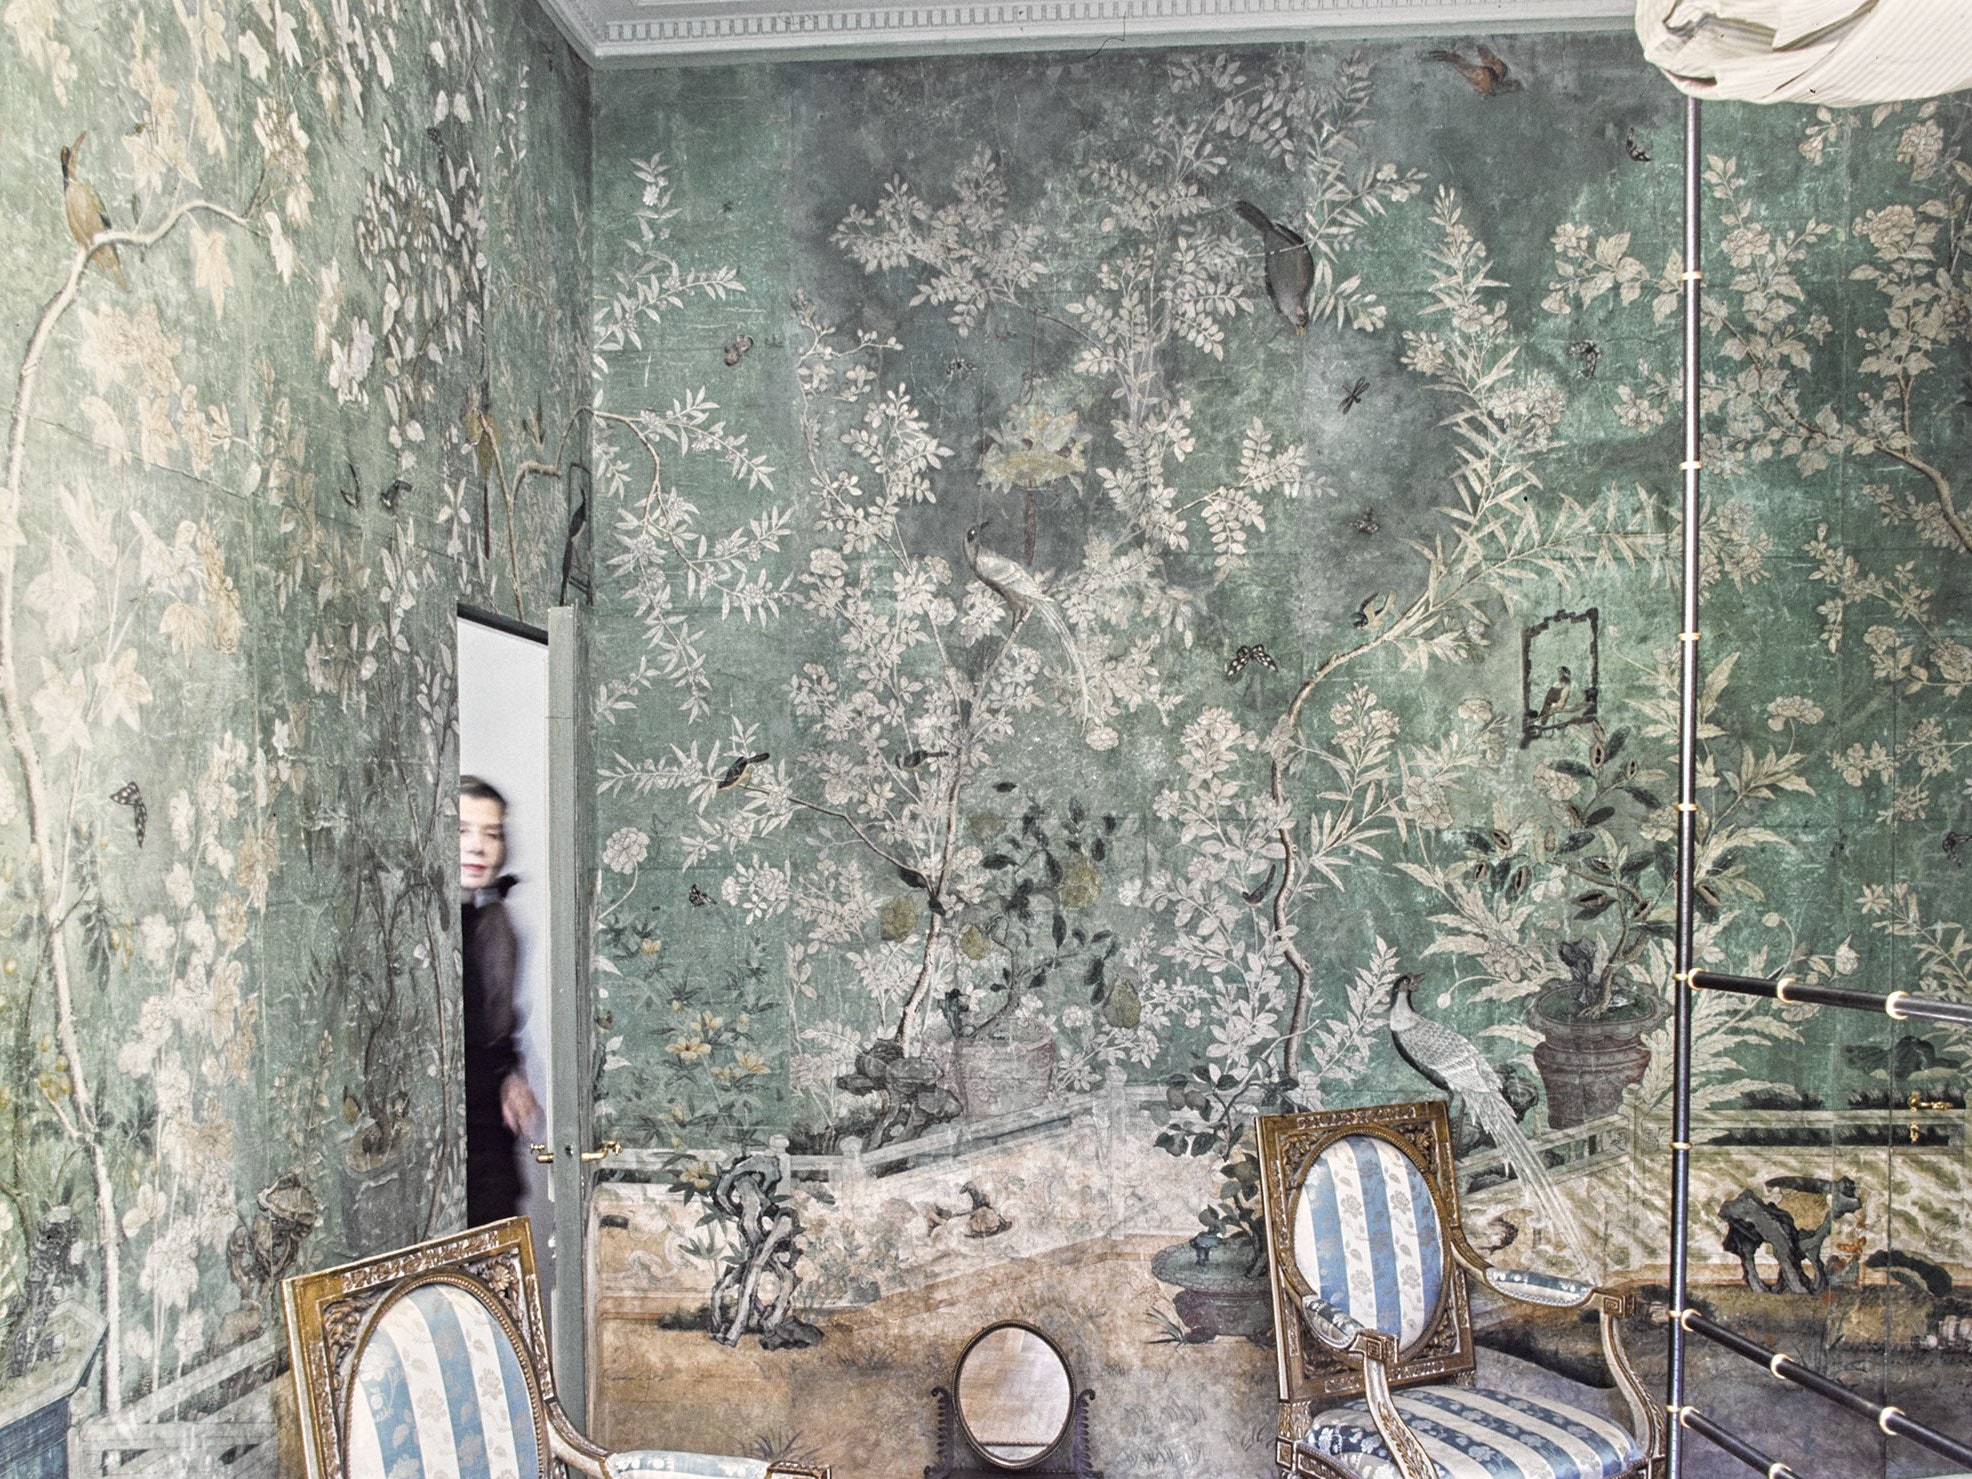 Where To Buy Wallpaper Experts Explain How Execute The